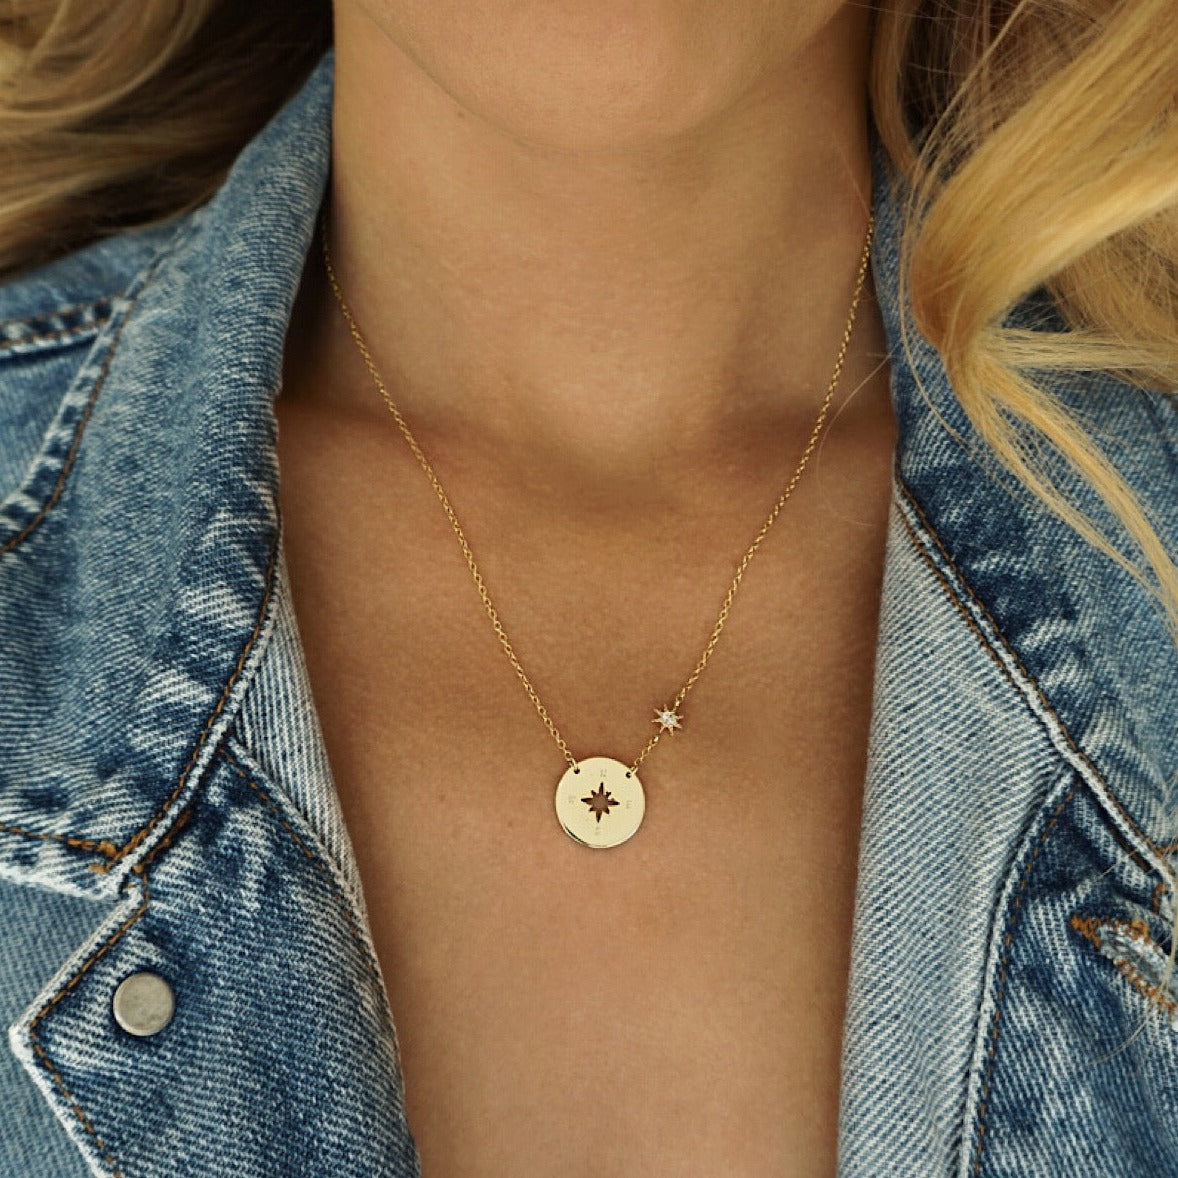 Gold Star Compass Necklace worn with jean jacket